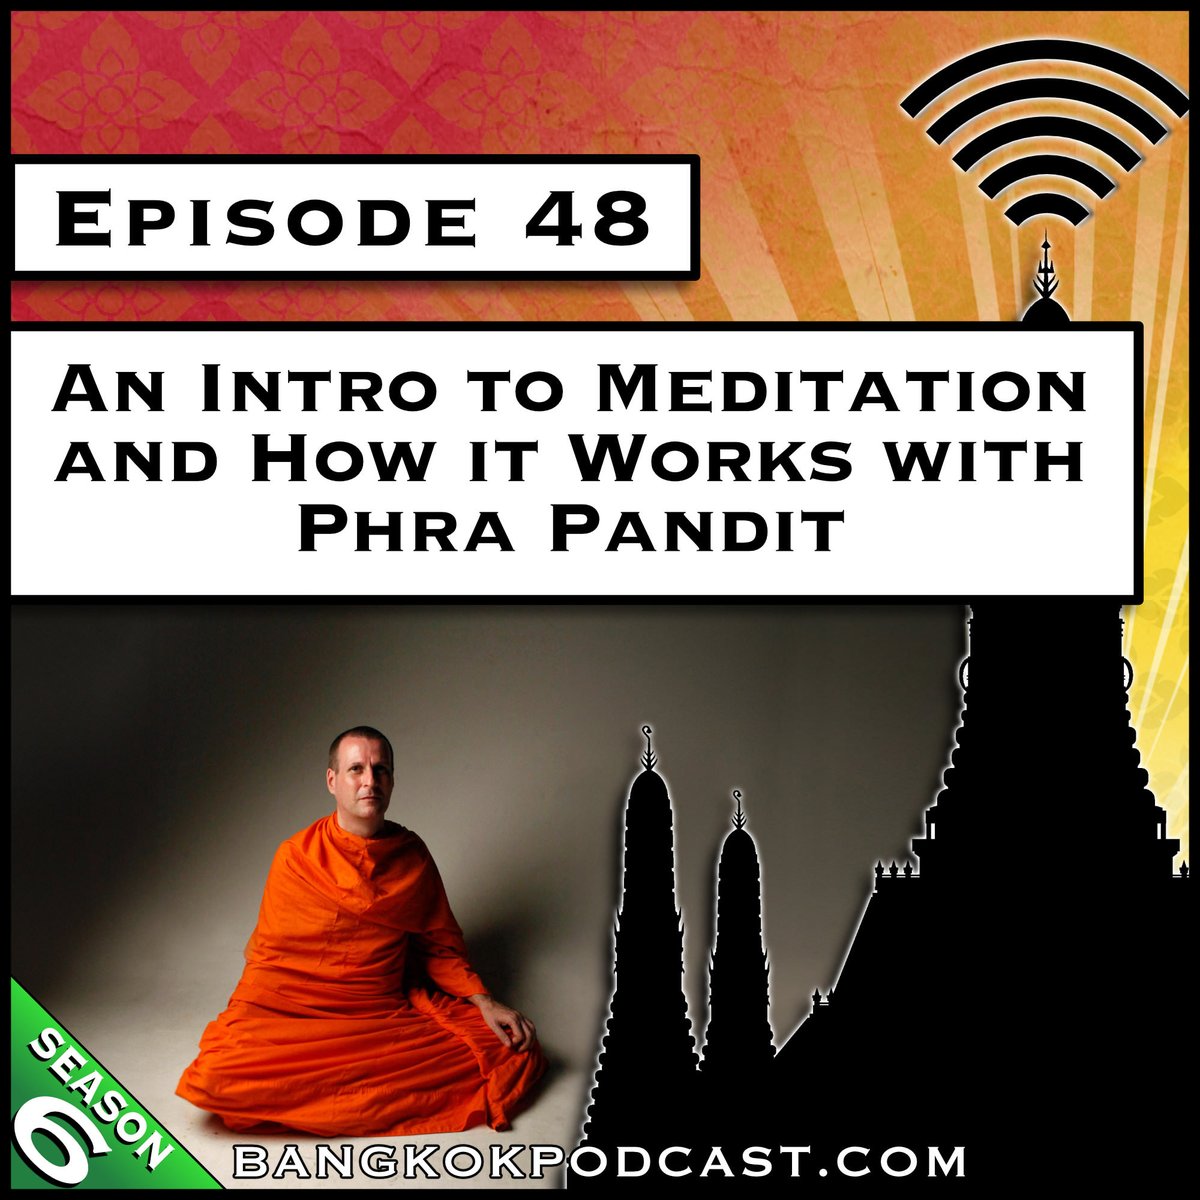 Many of you know a lot about meditation (like Ed) but others might find it a bit of a black hole (like Greg). Ed chats with our friend, monk Phra Pandit, to get some juicy knowledge on how it all works and what benefits it can bring. thaifaq.libsyn.com/an-intro-to-me…